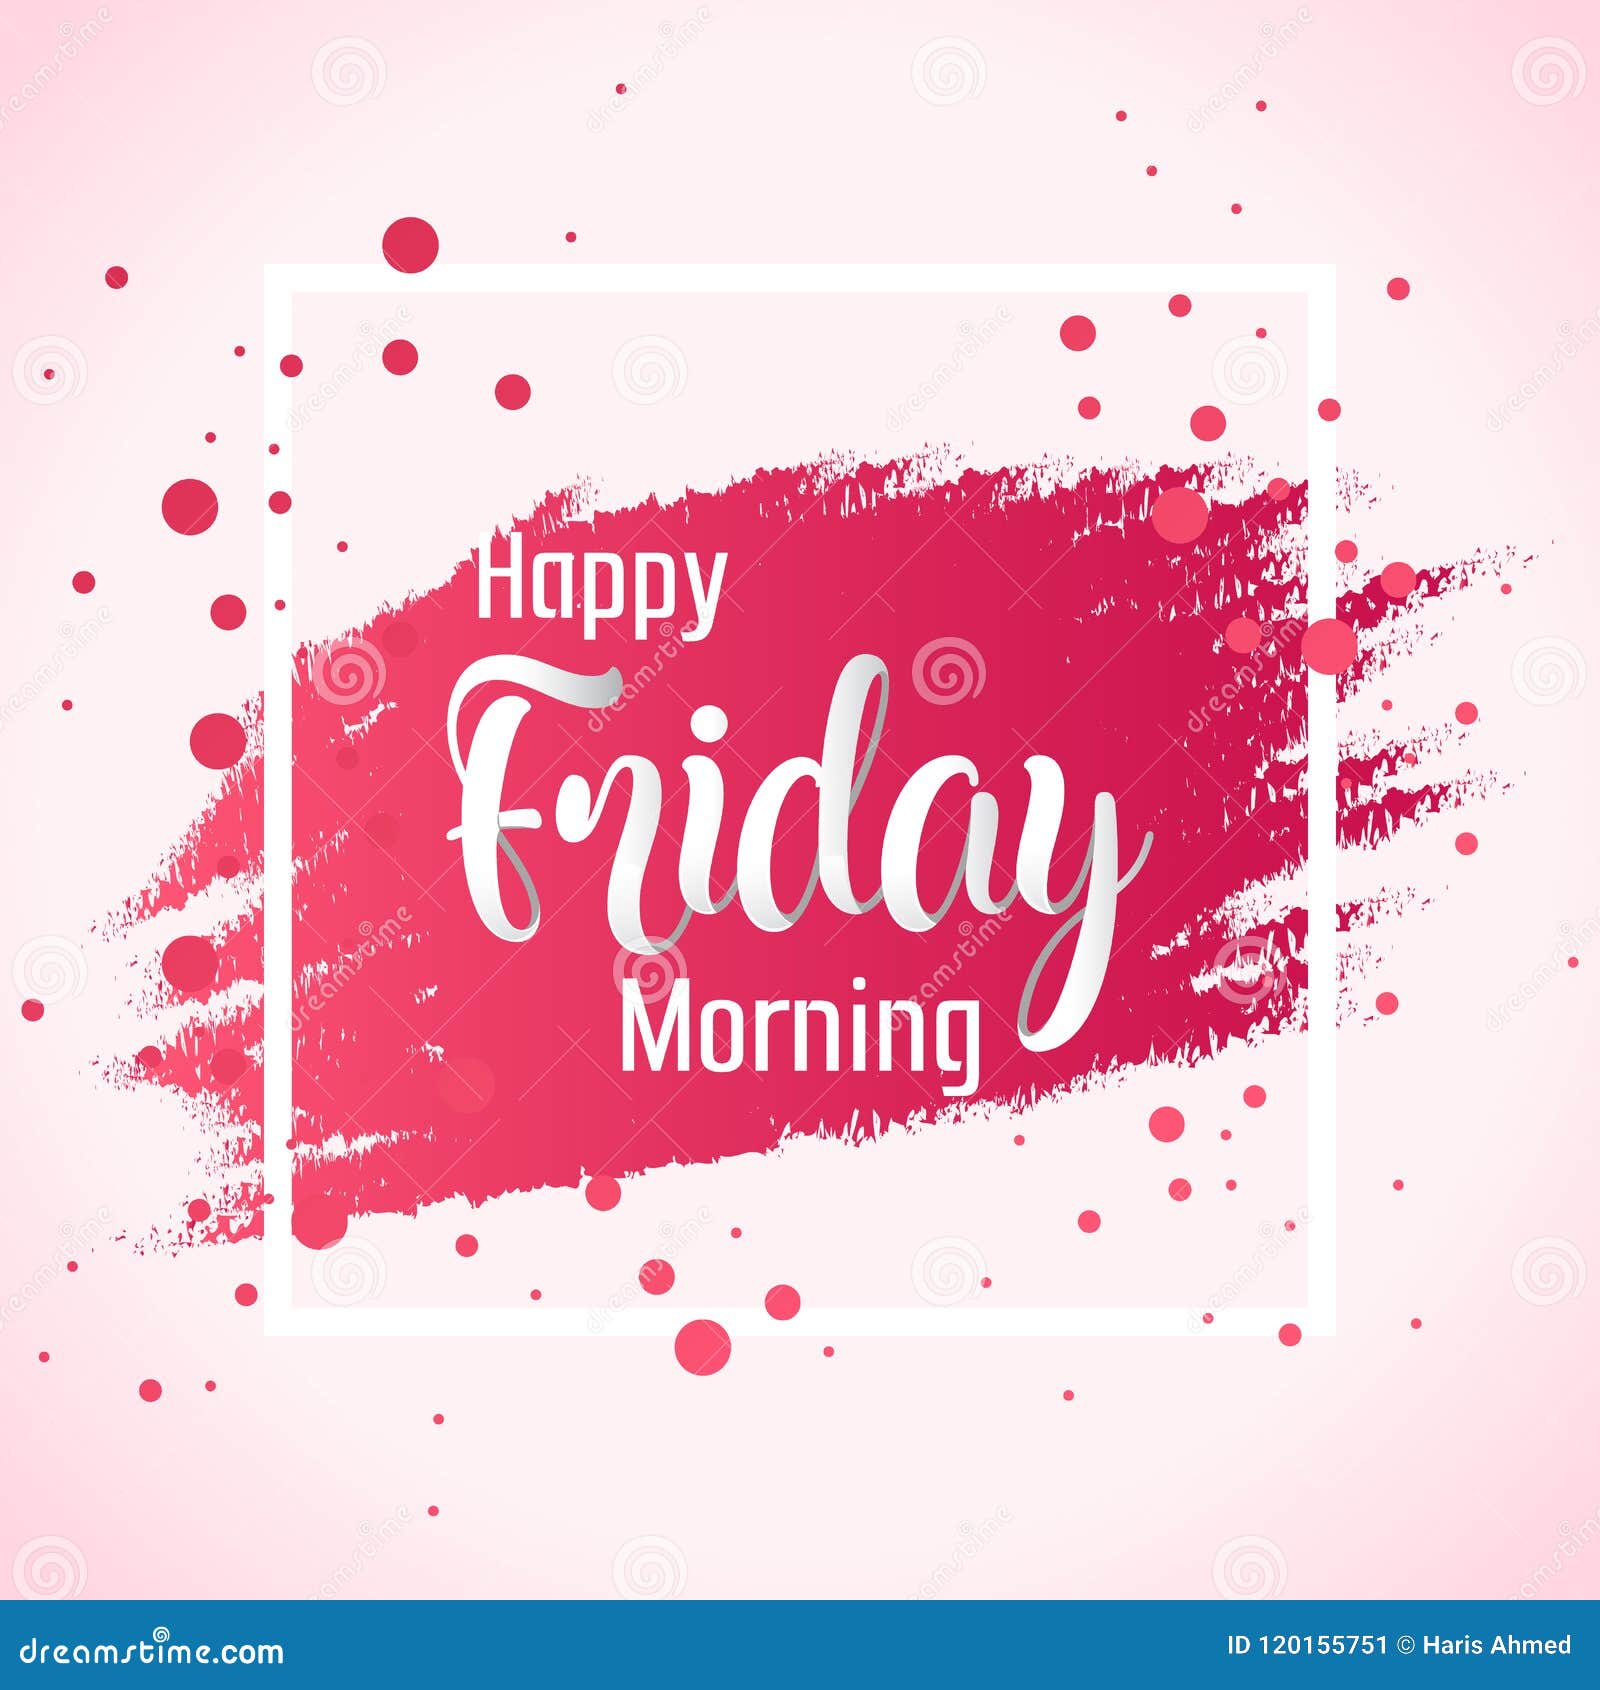 Abstract Happy Friday Morning Background Illustration Vector ...